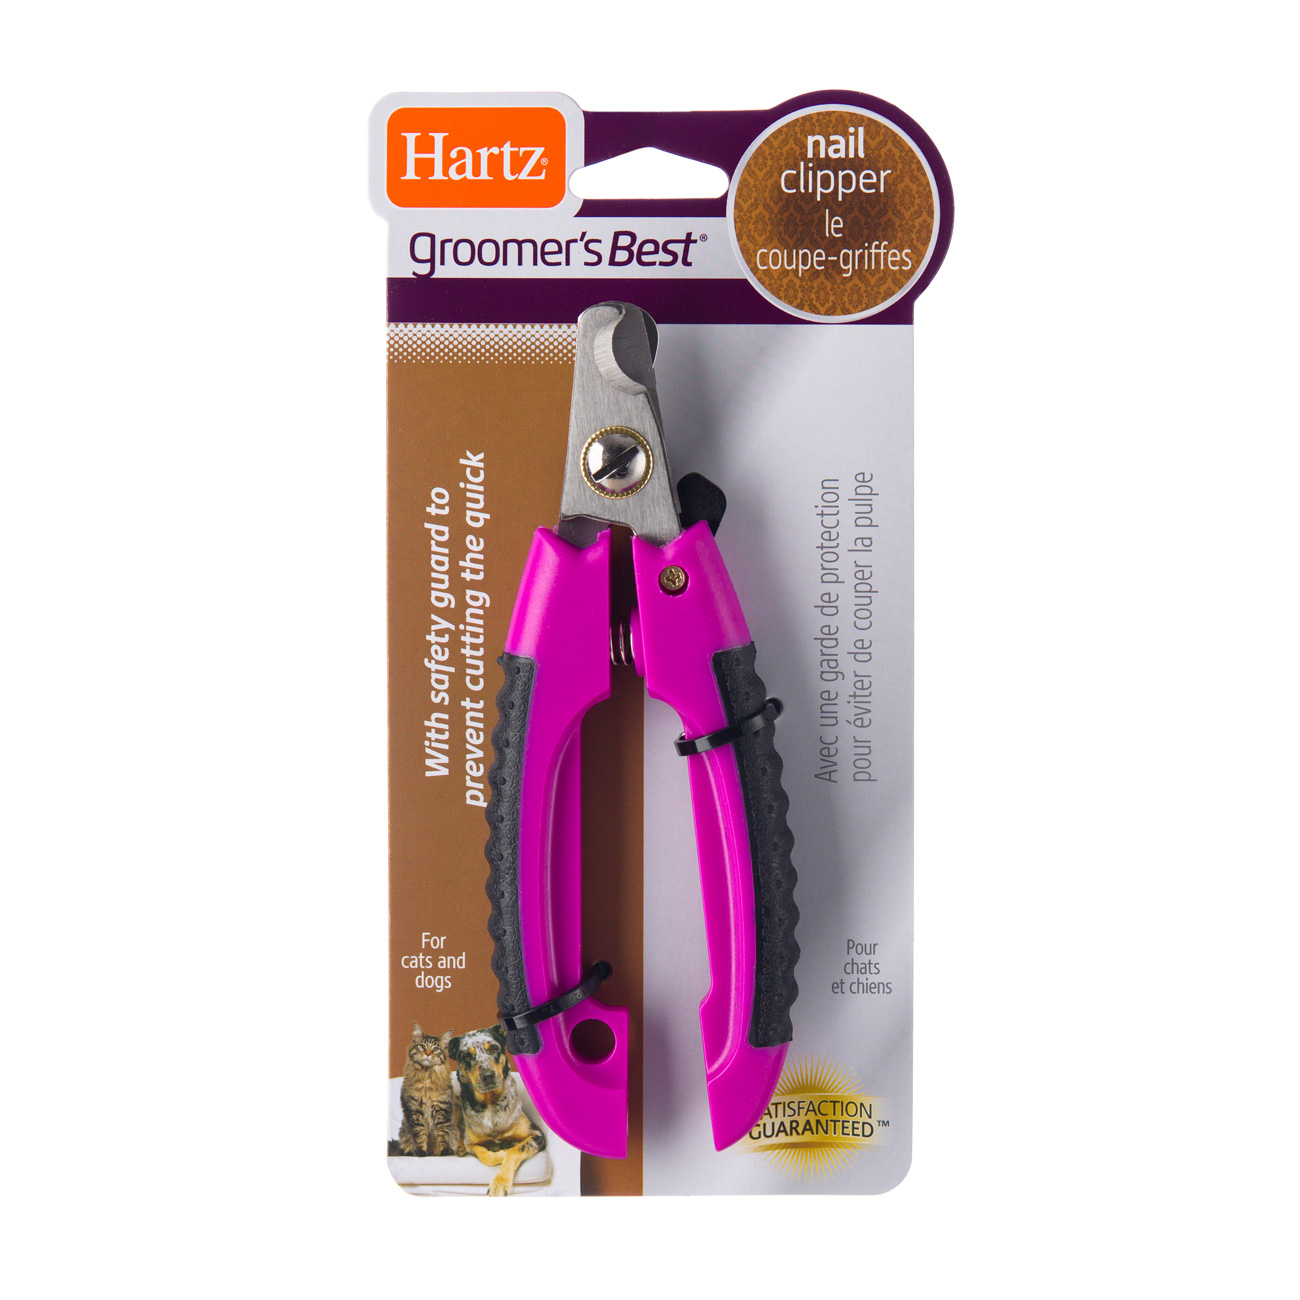 Hartz® Groomer's Best® Nail Clipper for Cats and Dogs | Hartz